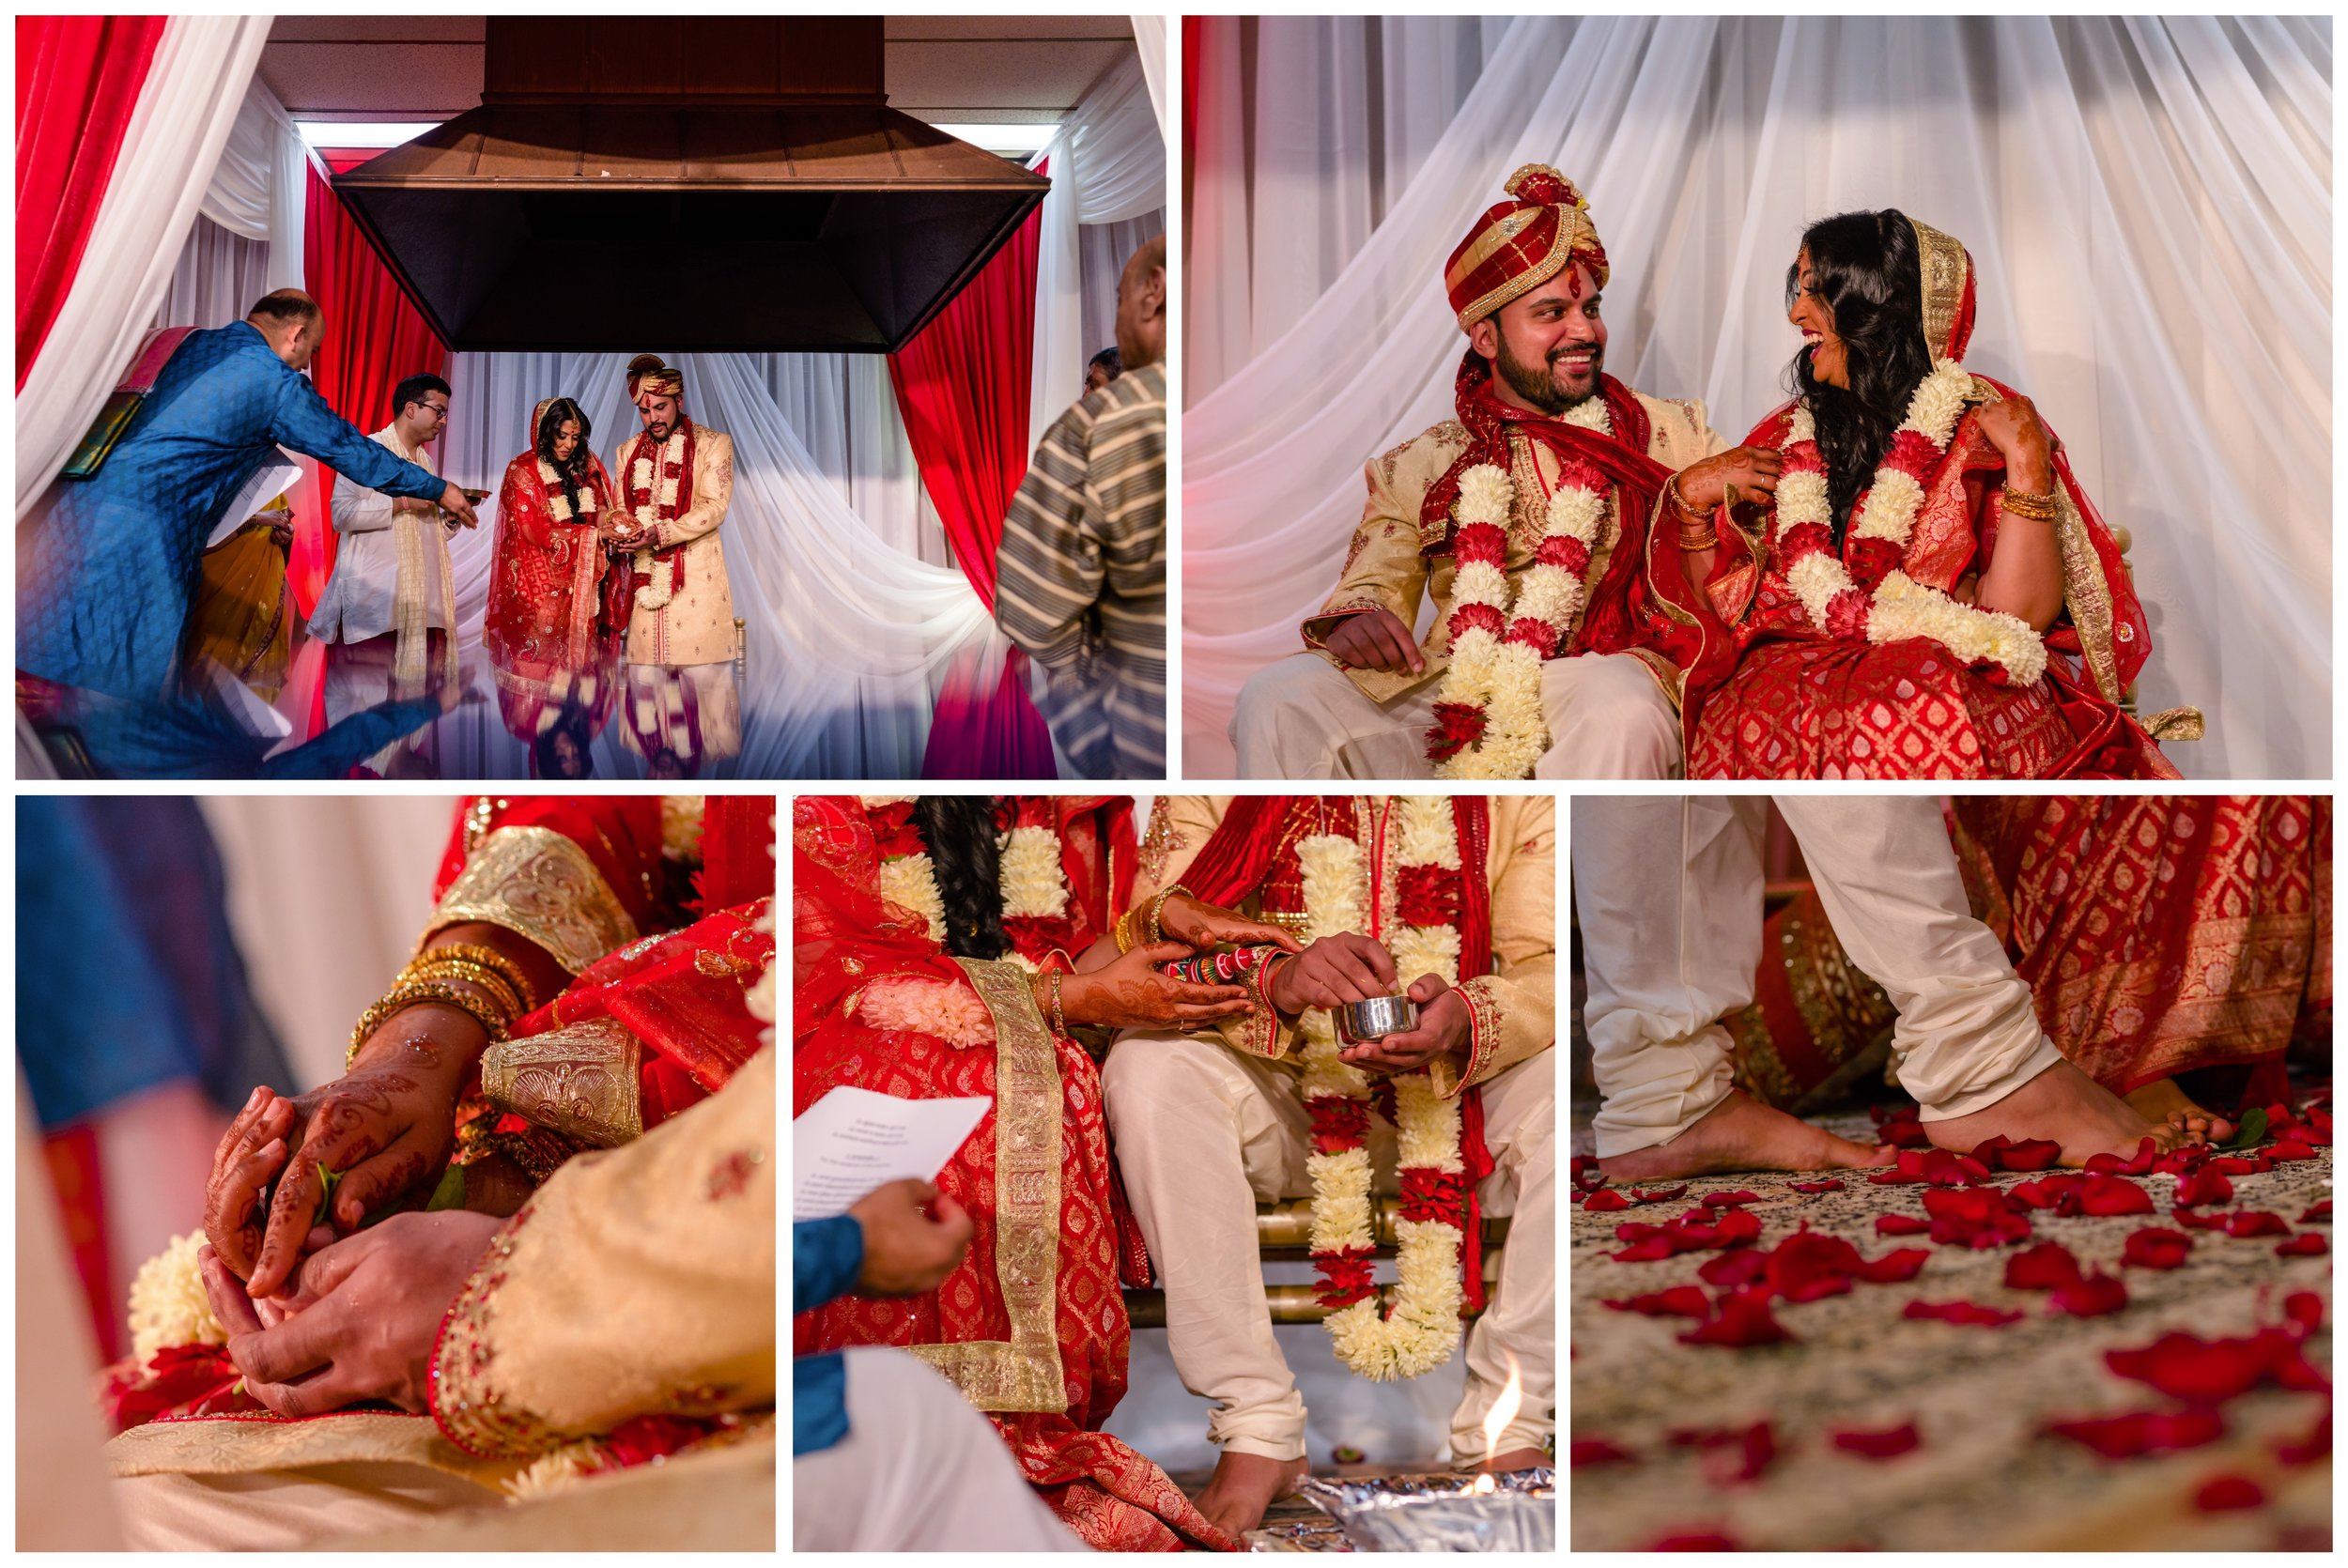 Photos of an Indian couple at their wedding ceremony